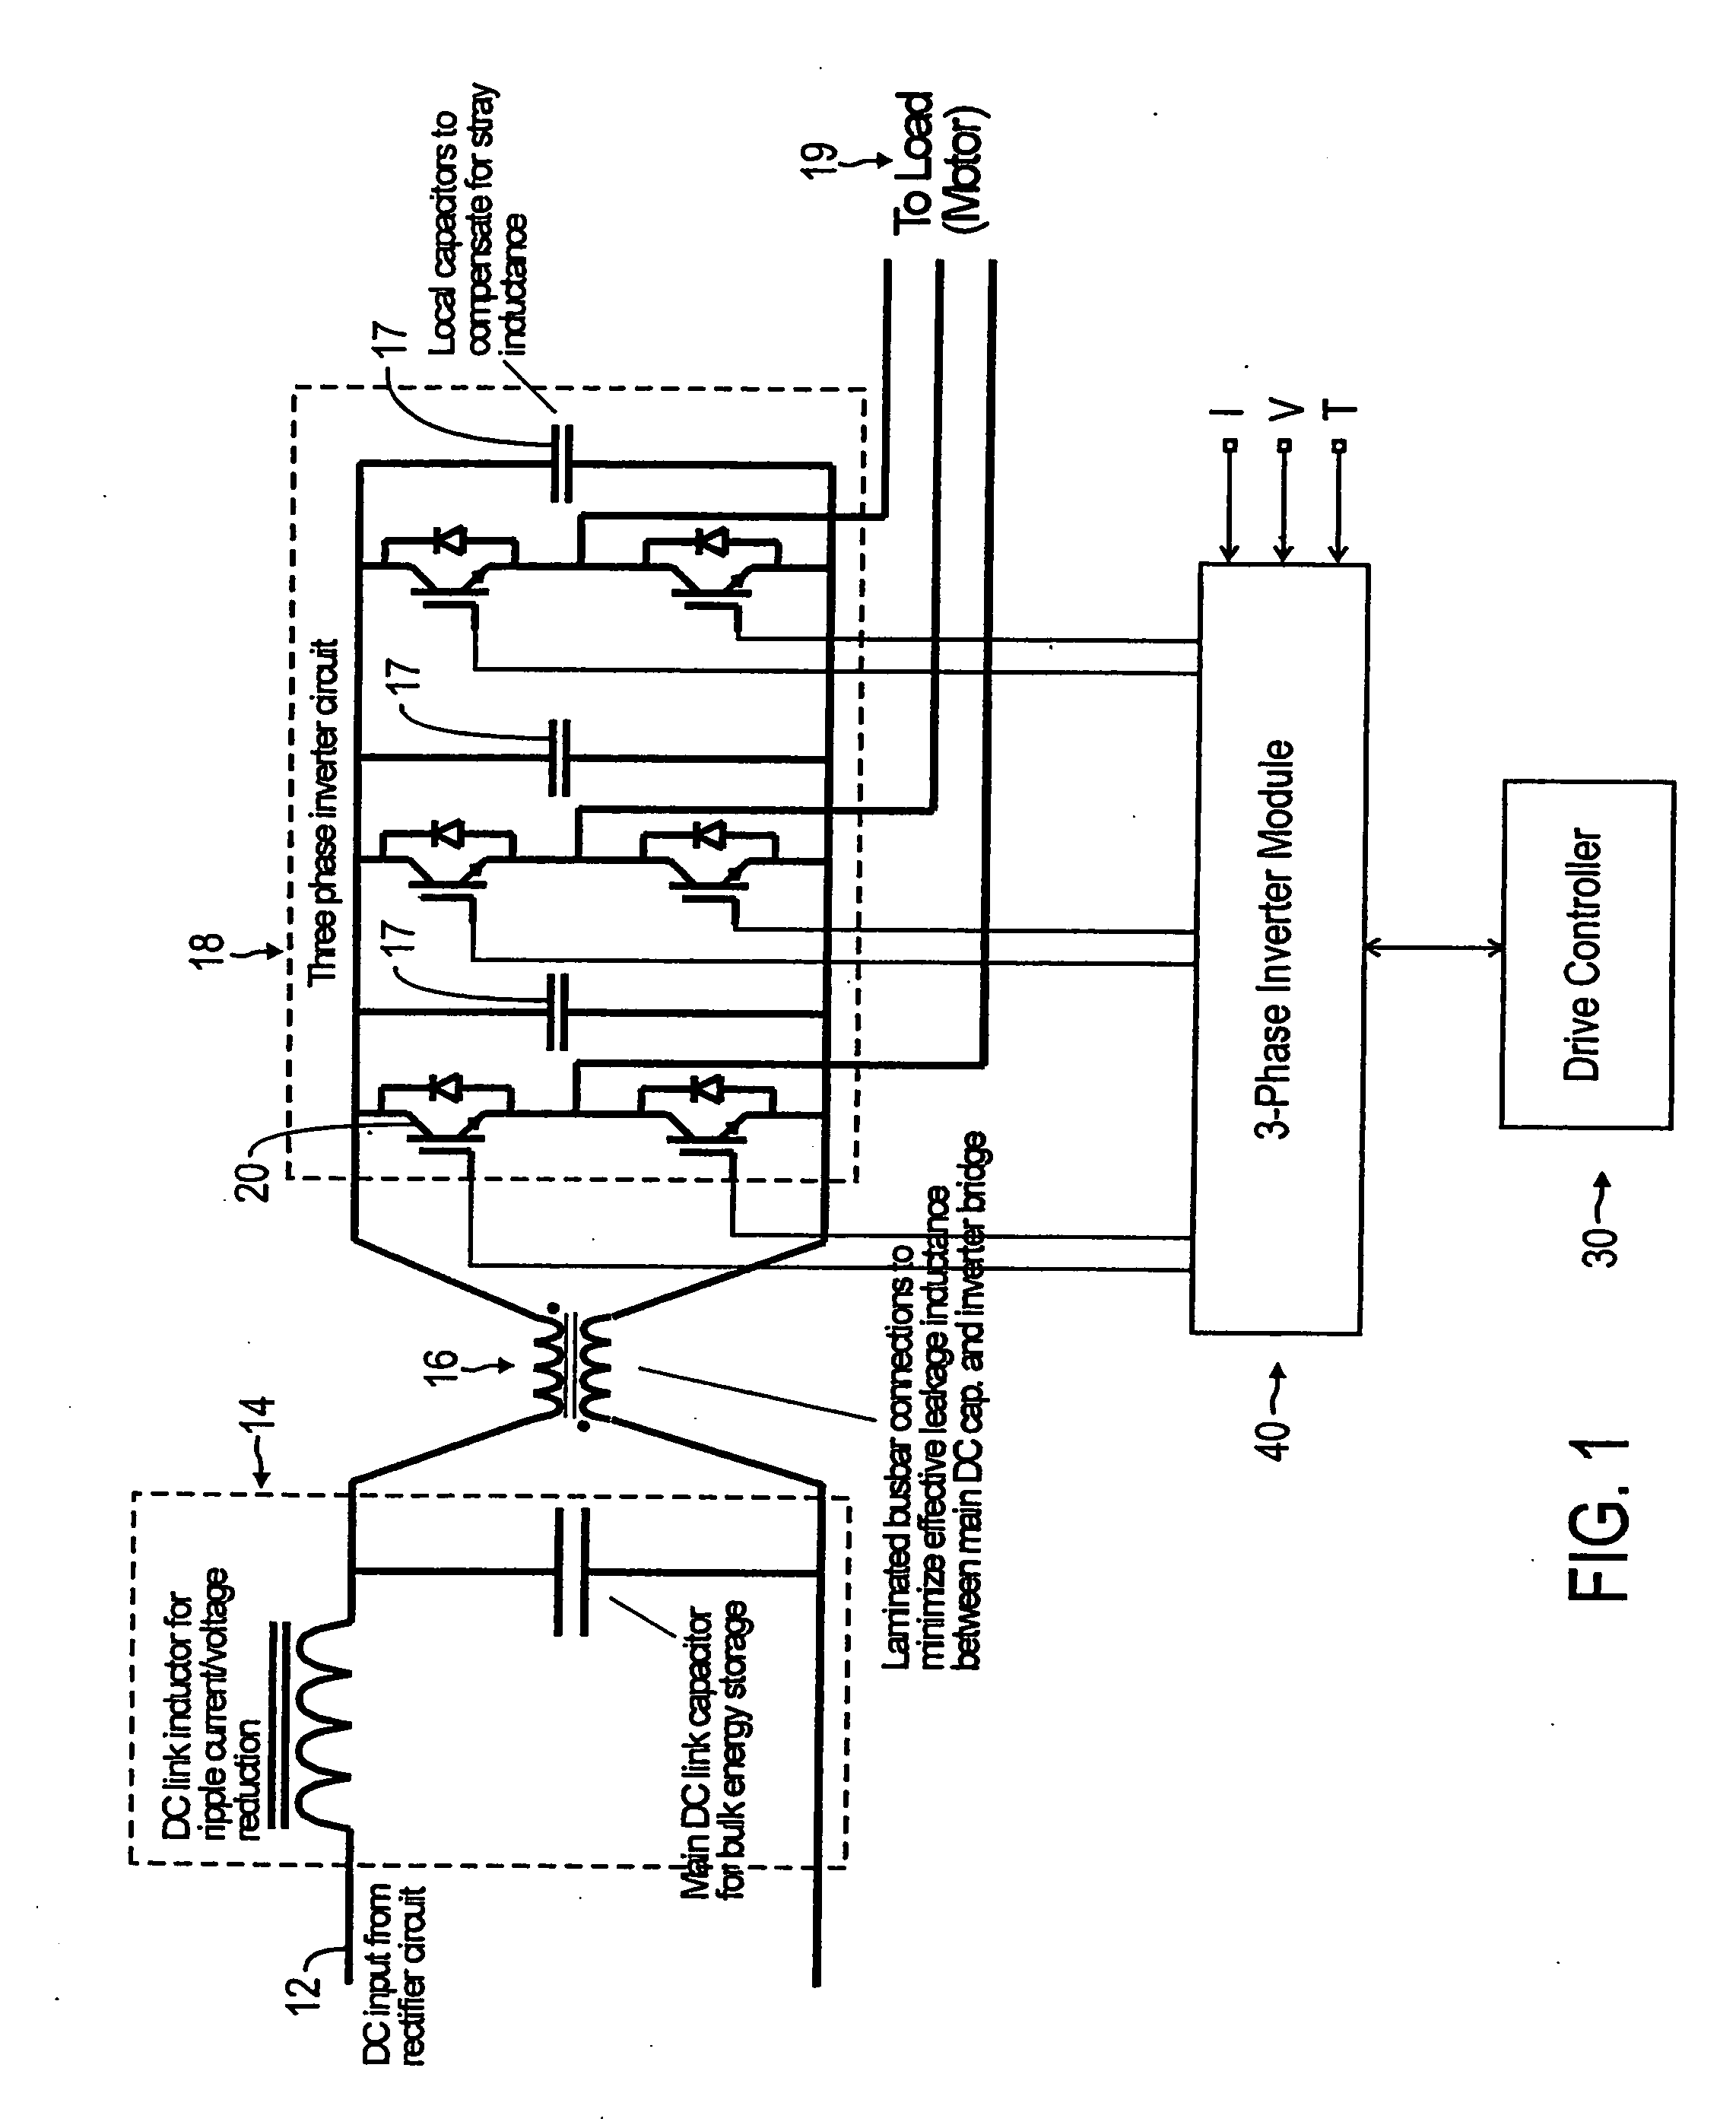 Adaptive gate drive for switching devices of inverter